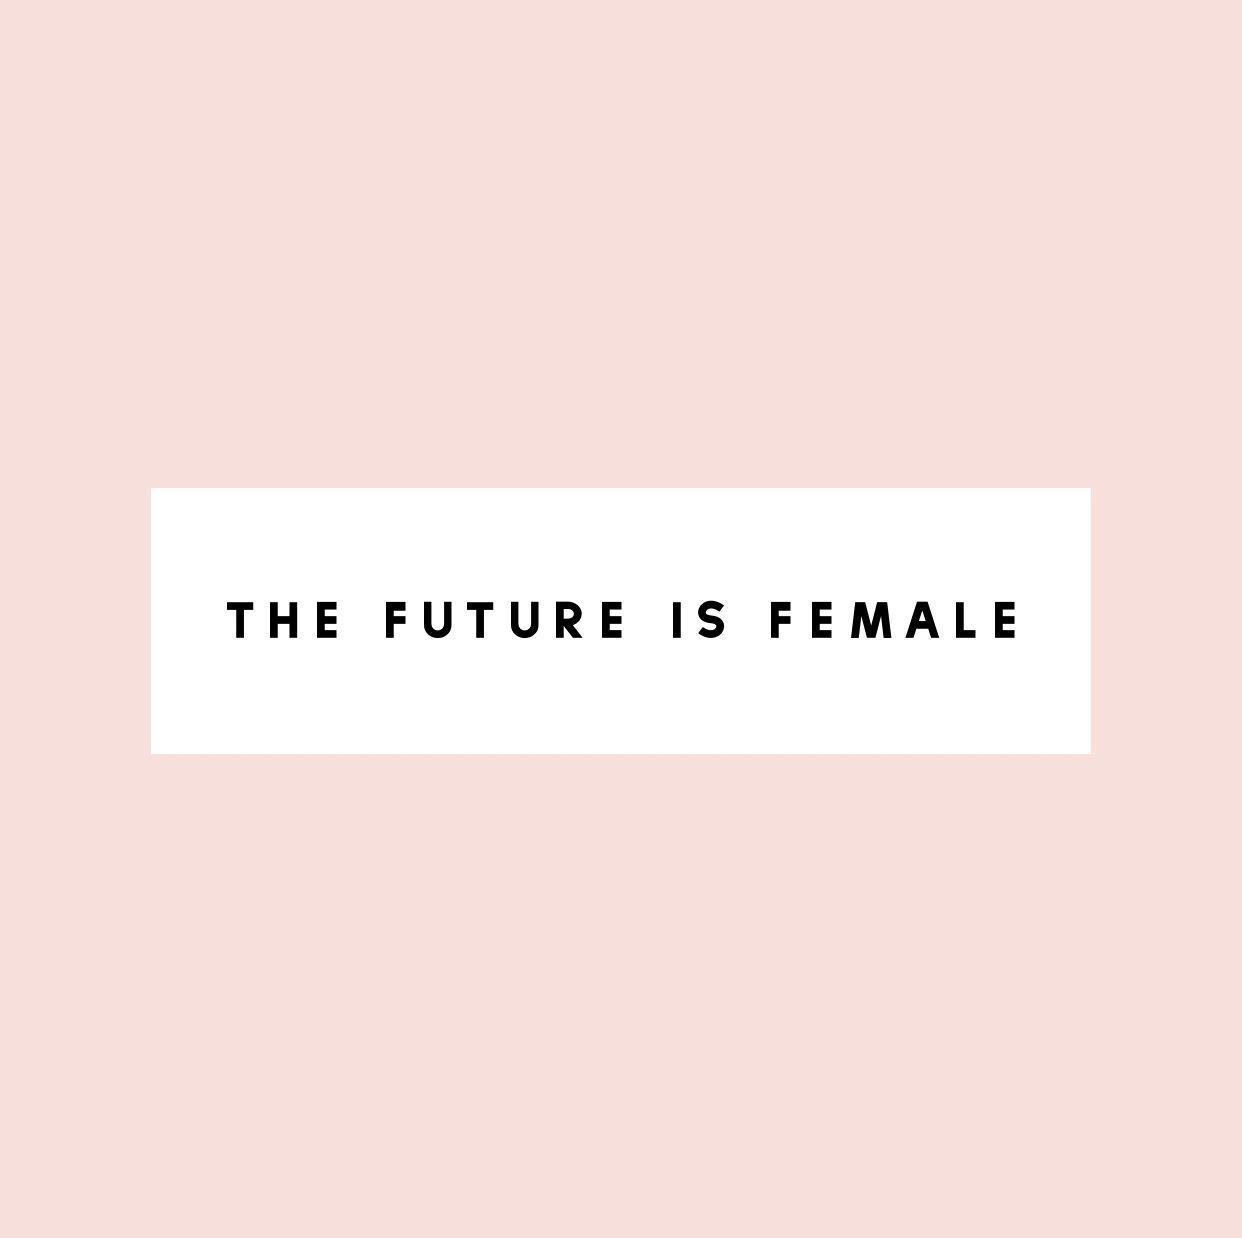 Yes that's right, the future IS female. Feminist quotes